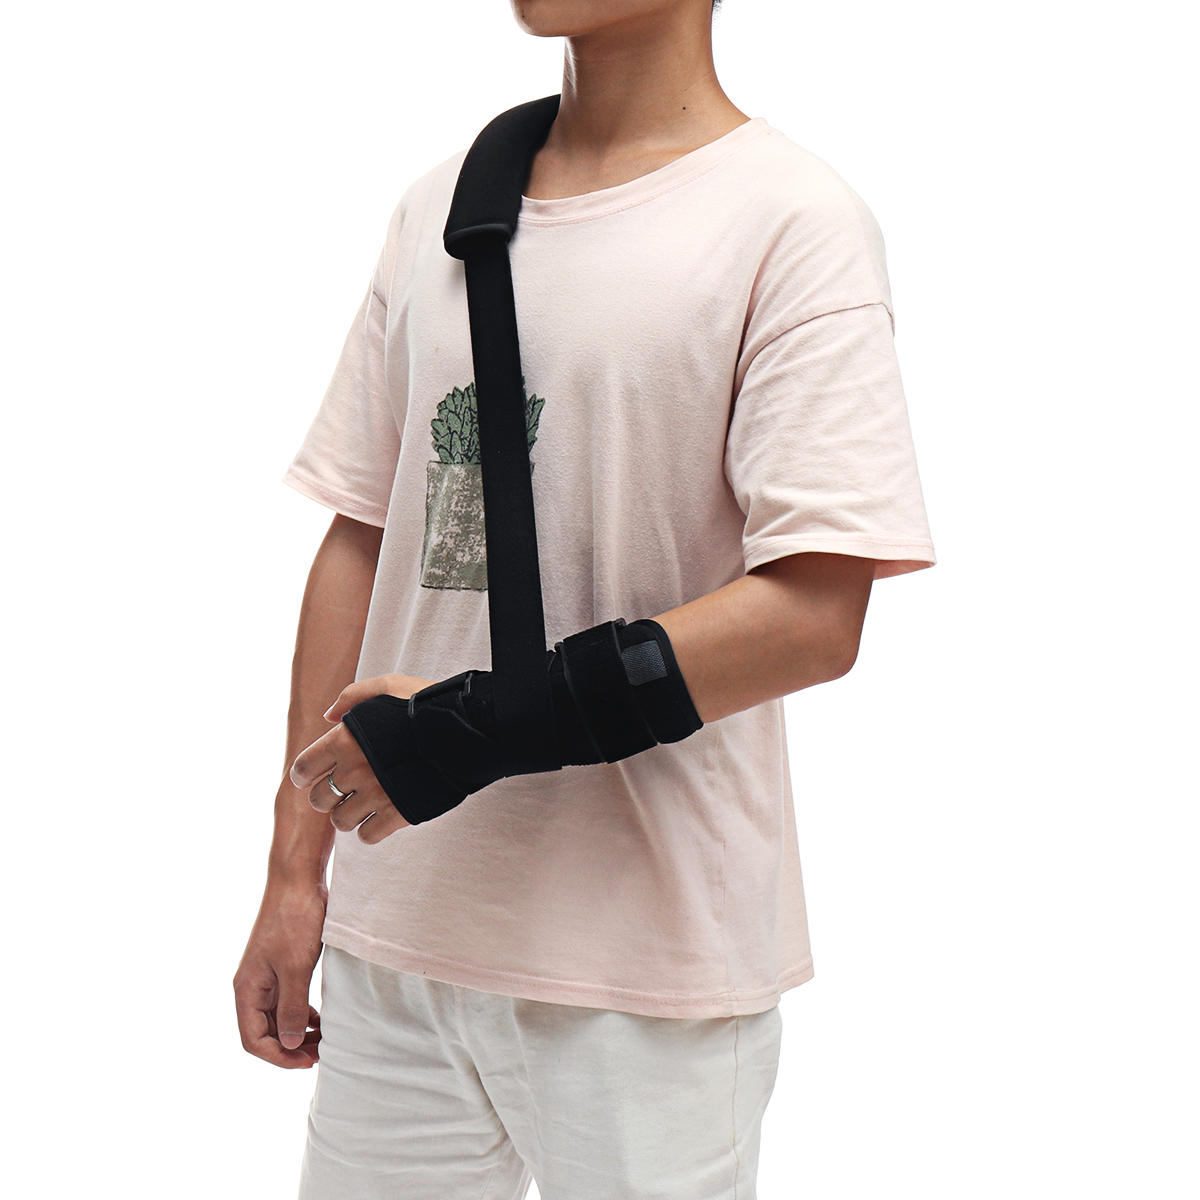 Breathable-Adjustable-Wrist-Support-Wrist-Brace-Wrist-Joint-Fixation-Sprain-Protector-Medical-Protec-1571406-9